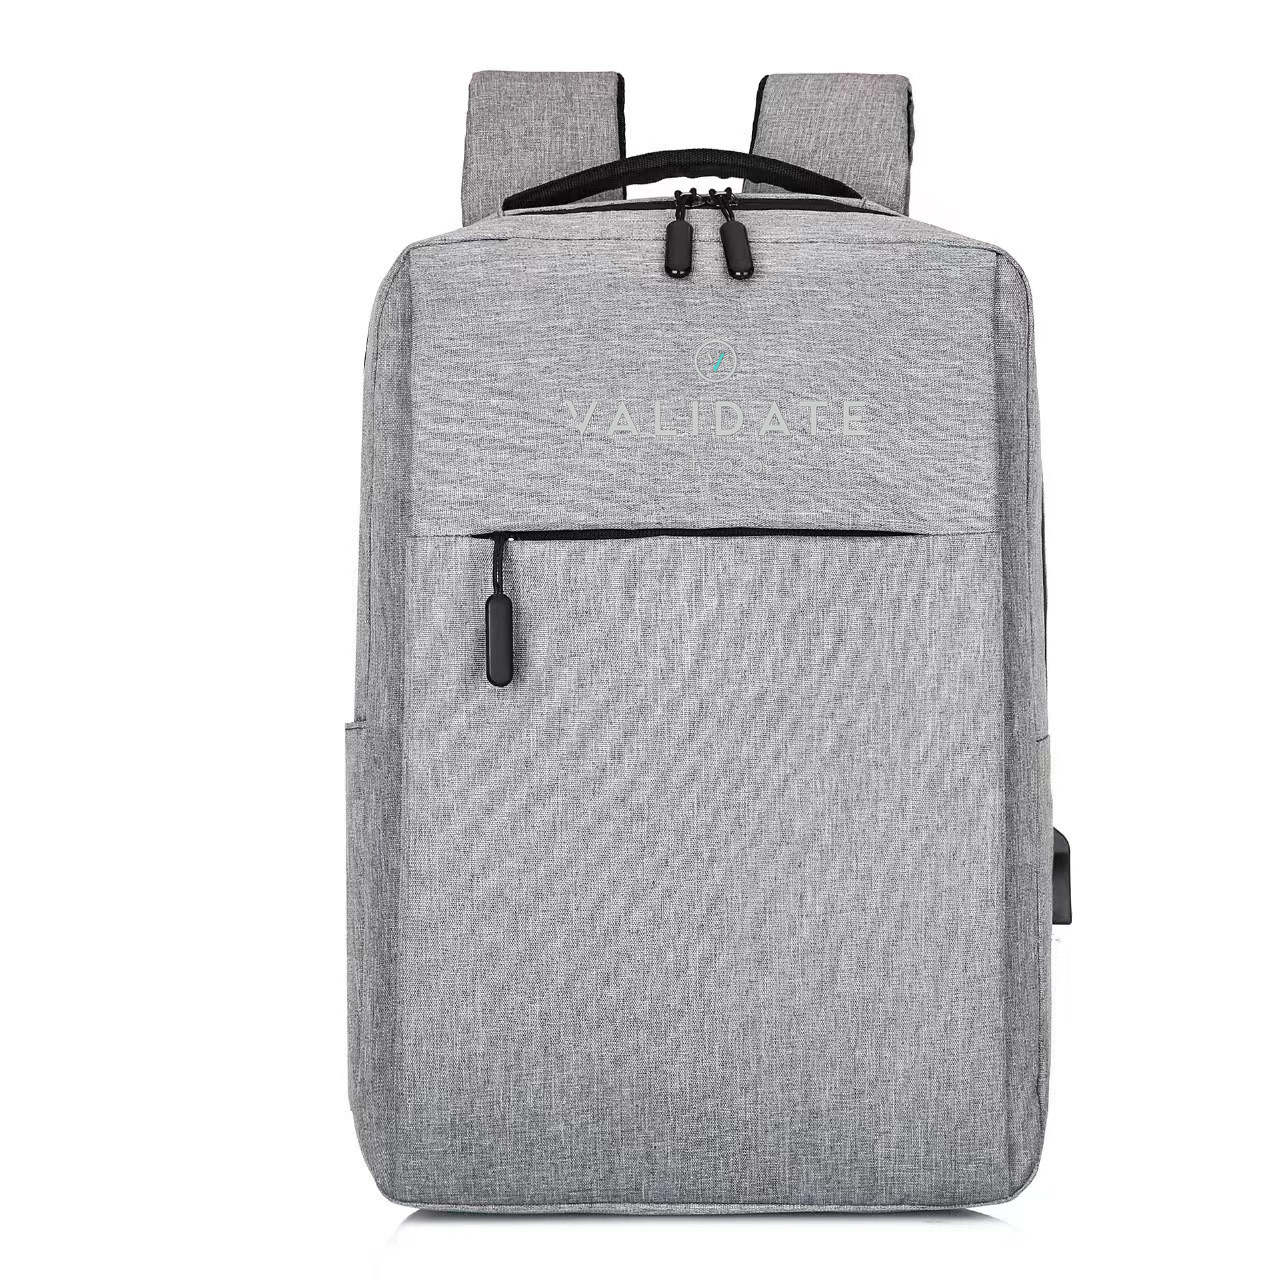 Validate Outdoor Sports Hiking BackPack Grey